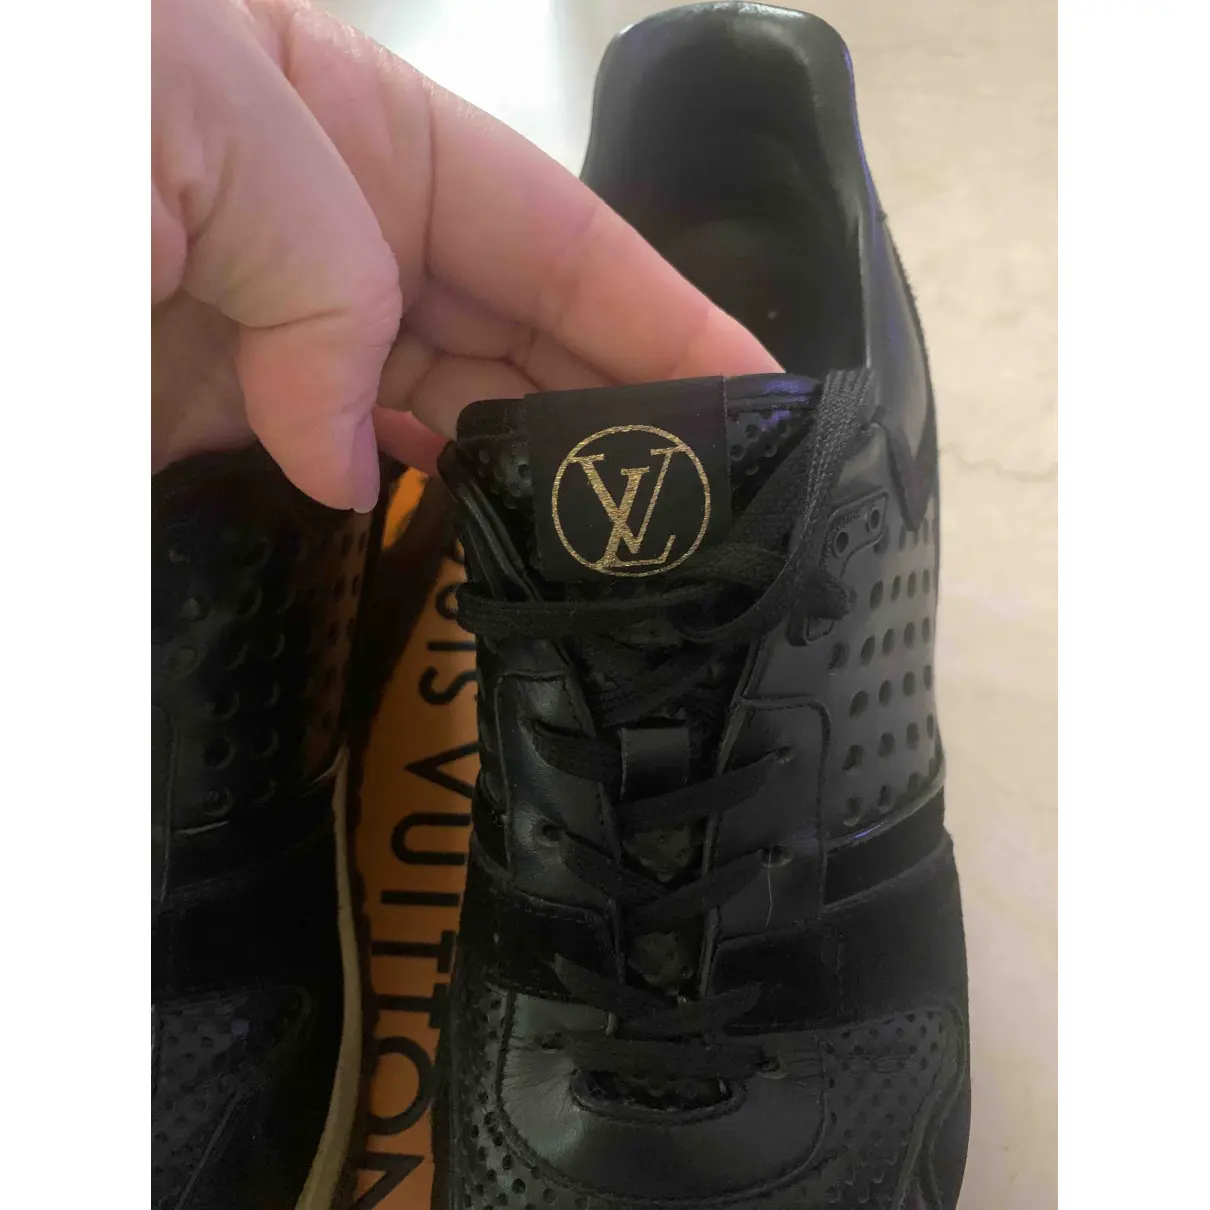 Run Away leather trainers Louis Vuitton